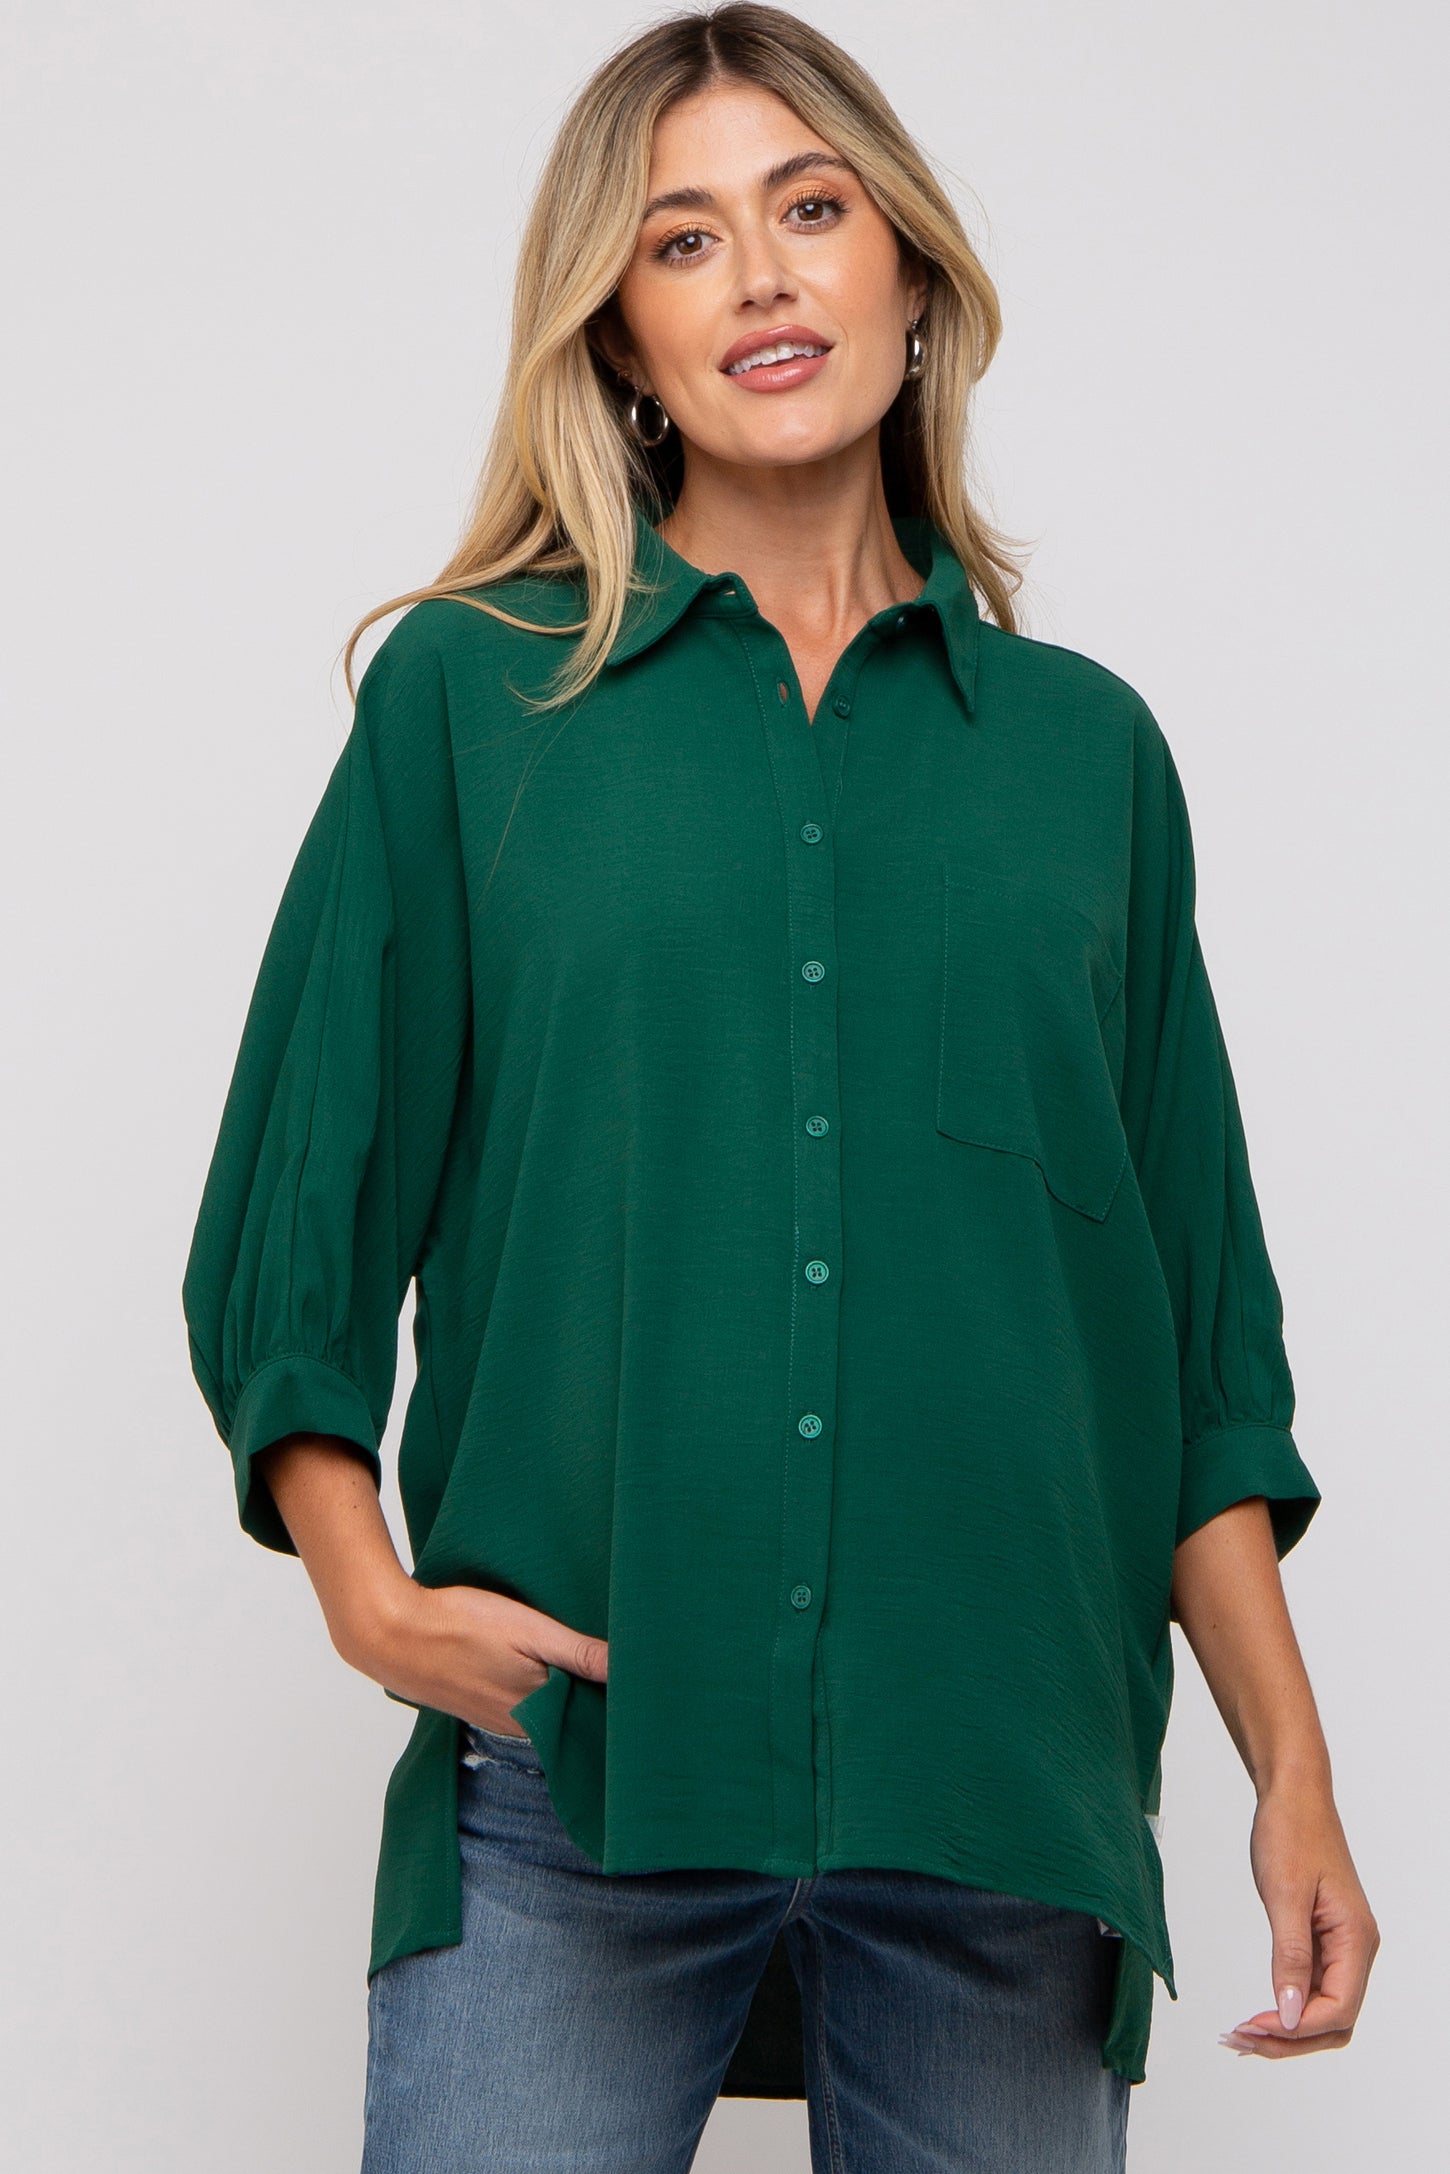 Forest Green Button Down 3/4 Sleeve Maternity Top